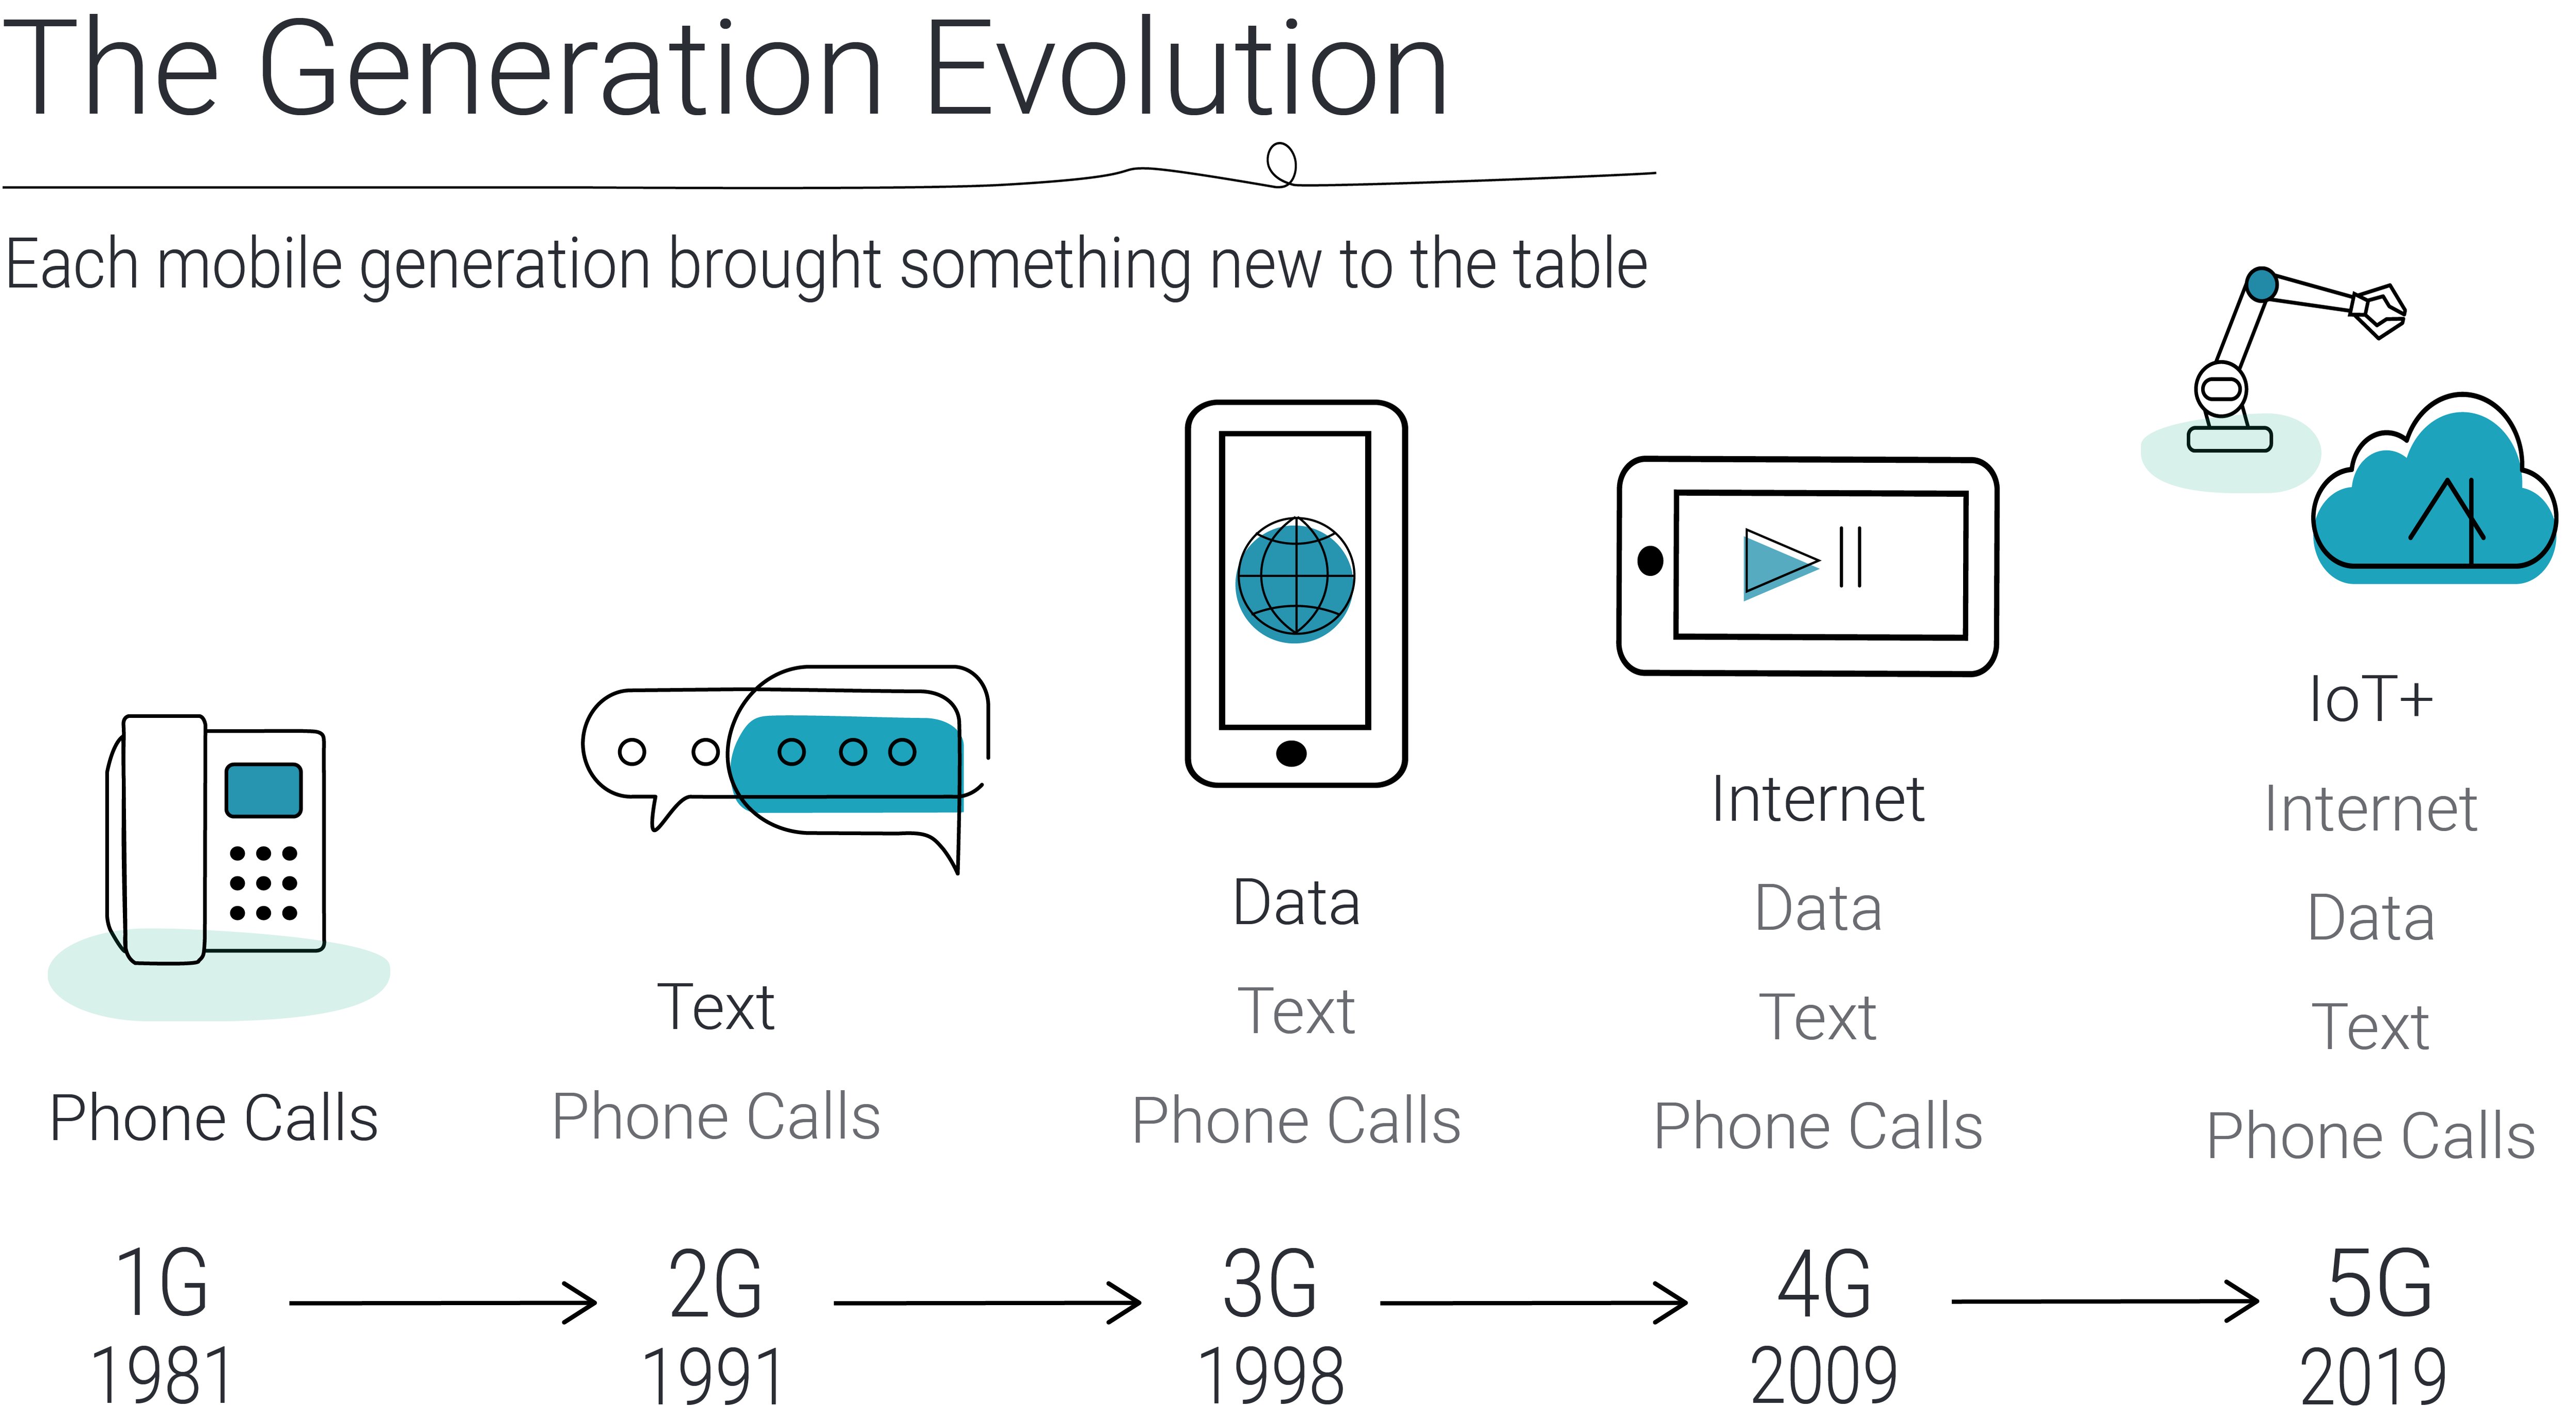 Graphic showing the difference between mobile generations 1G to 5G